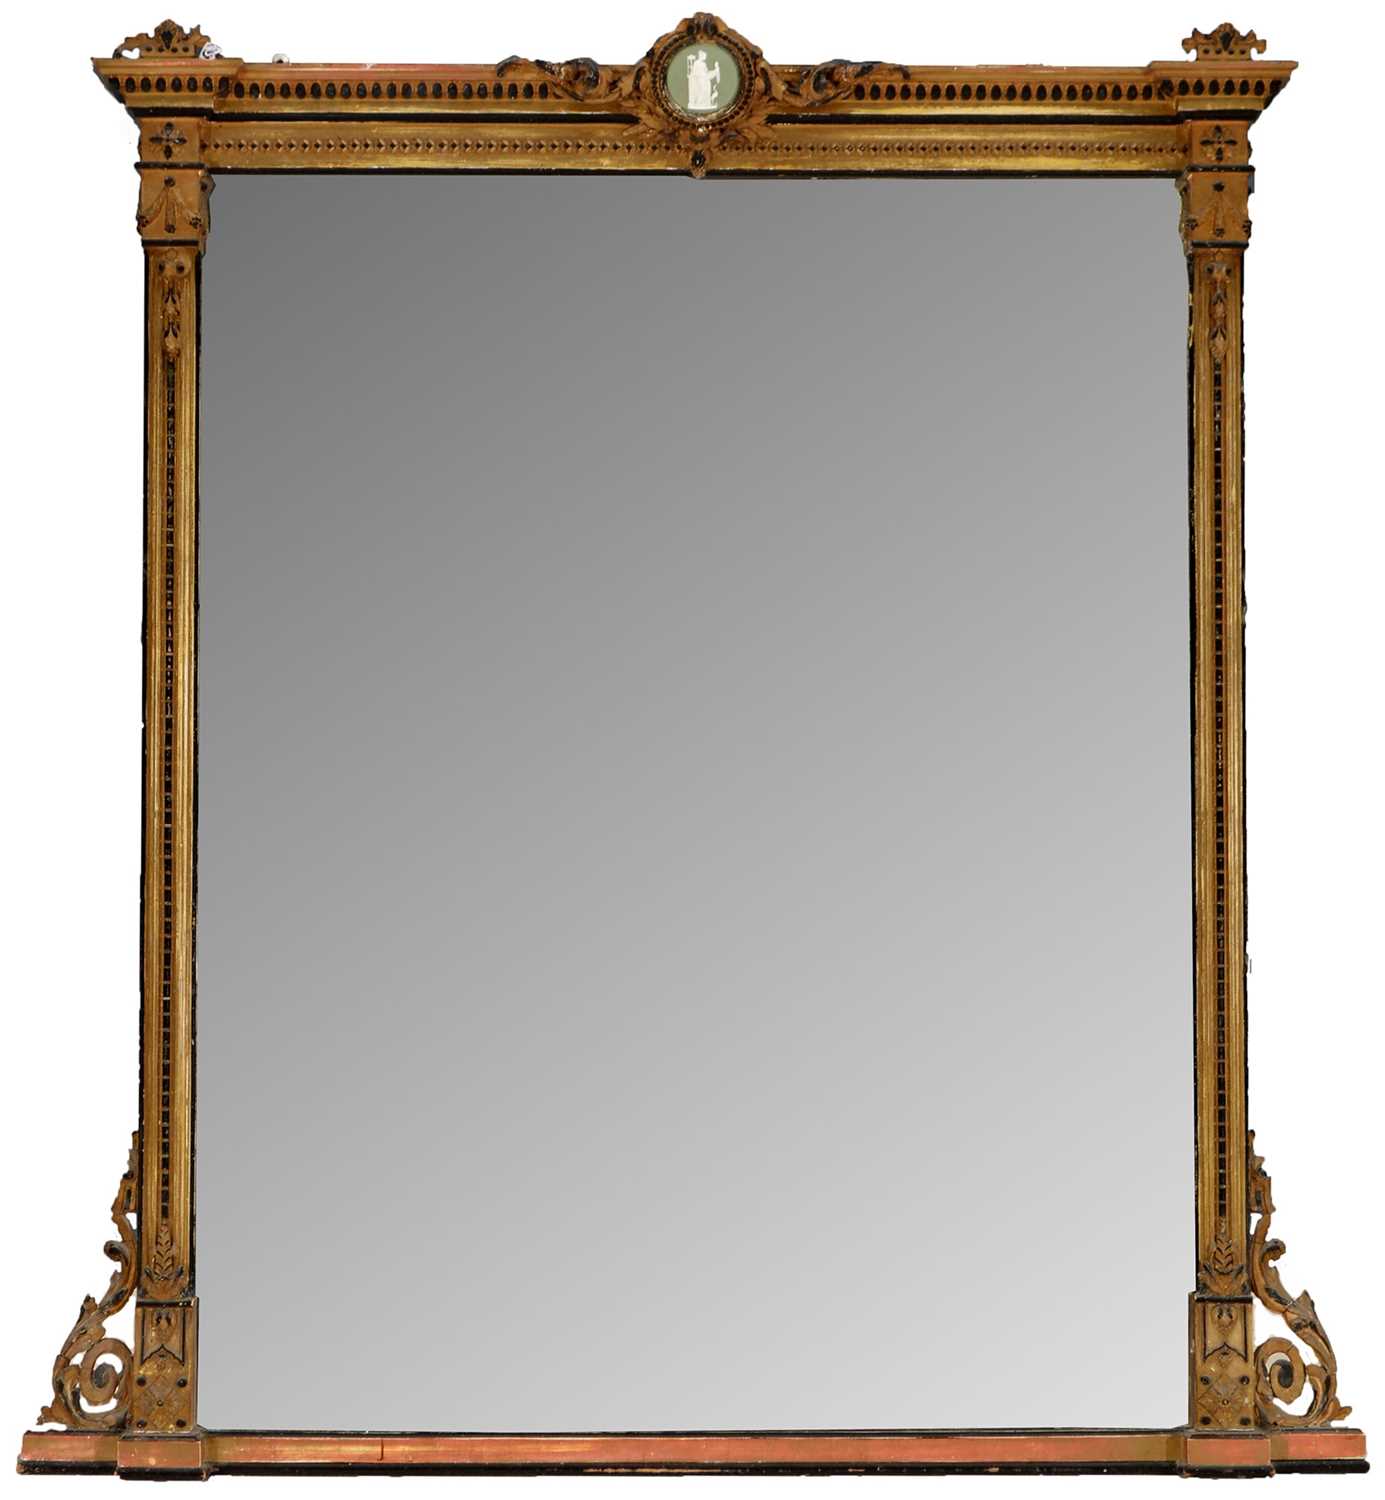 Lot 758 - late 19th century parcel gilt and gesso overmantel mirror